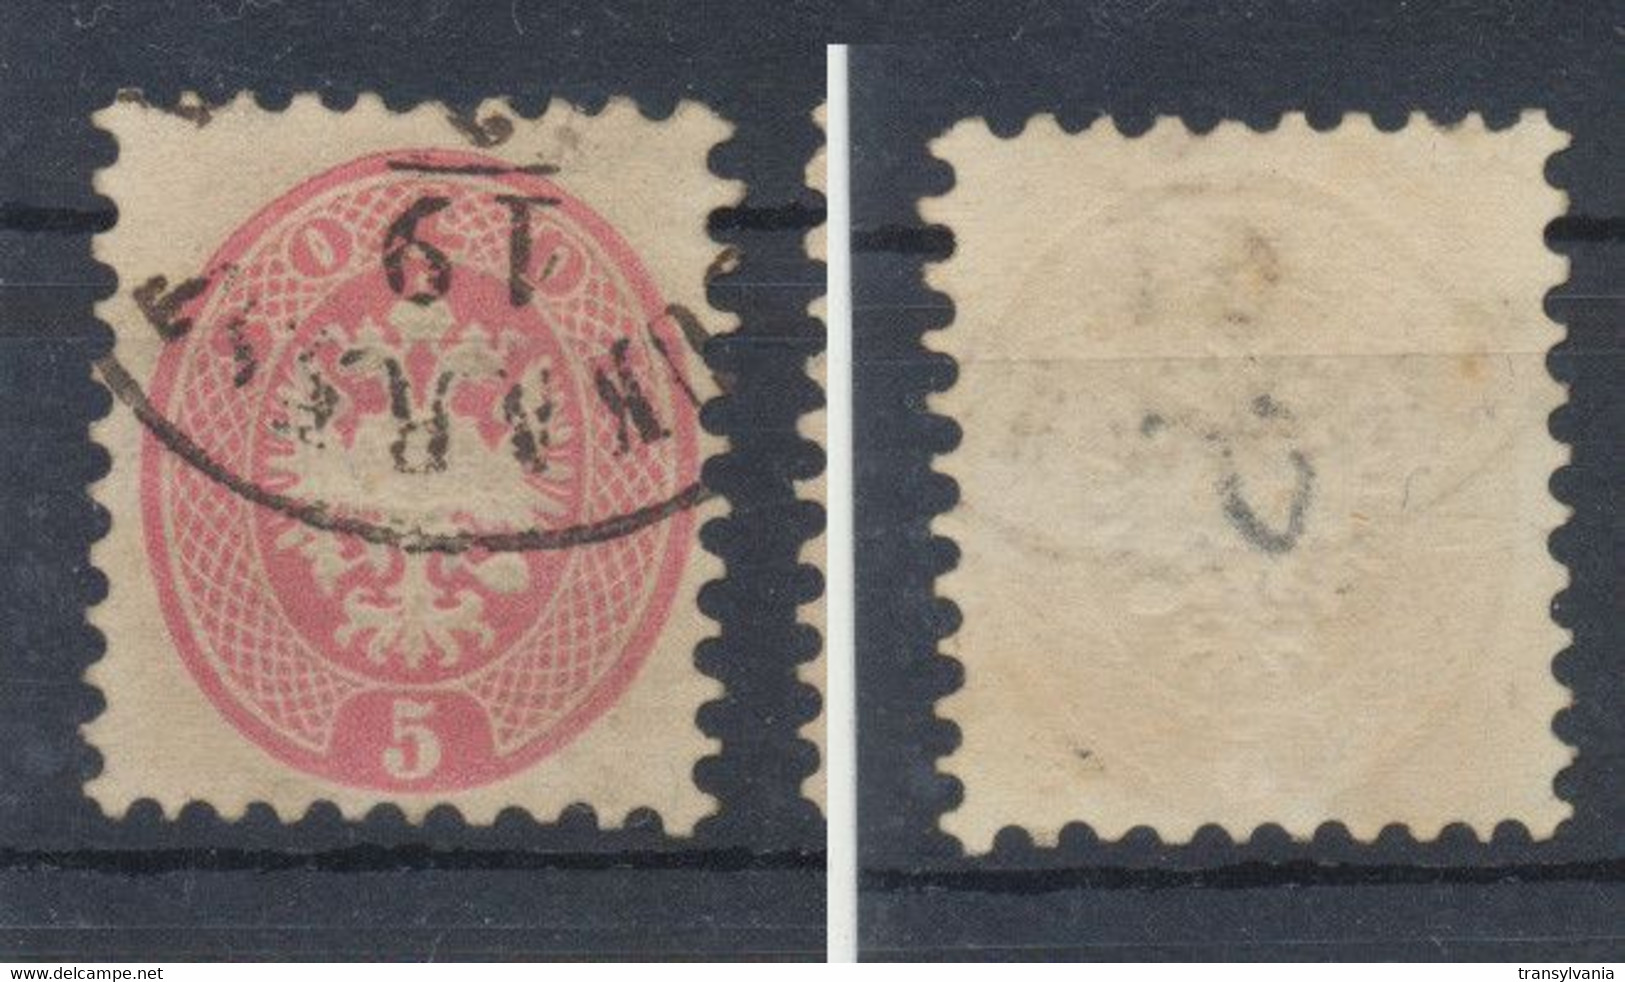 Romania 1864 Austria Post In Levant 5 Kreuzer Stamp With Bukarest Rekomandirt Cancellation Applied At Bucuresti - Foreign Occupations